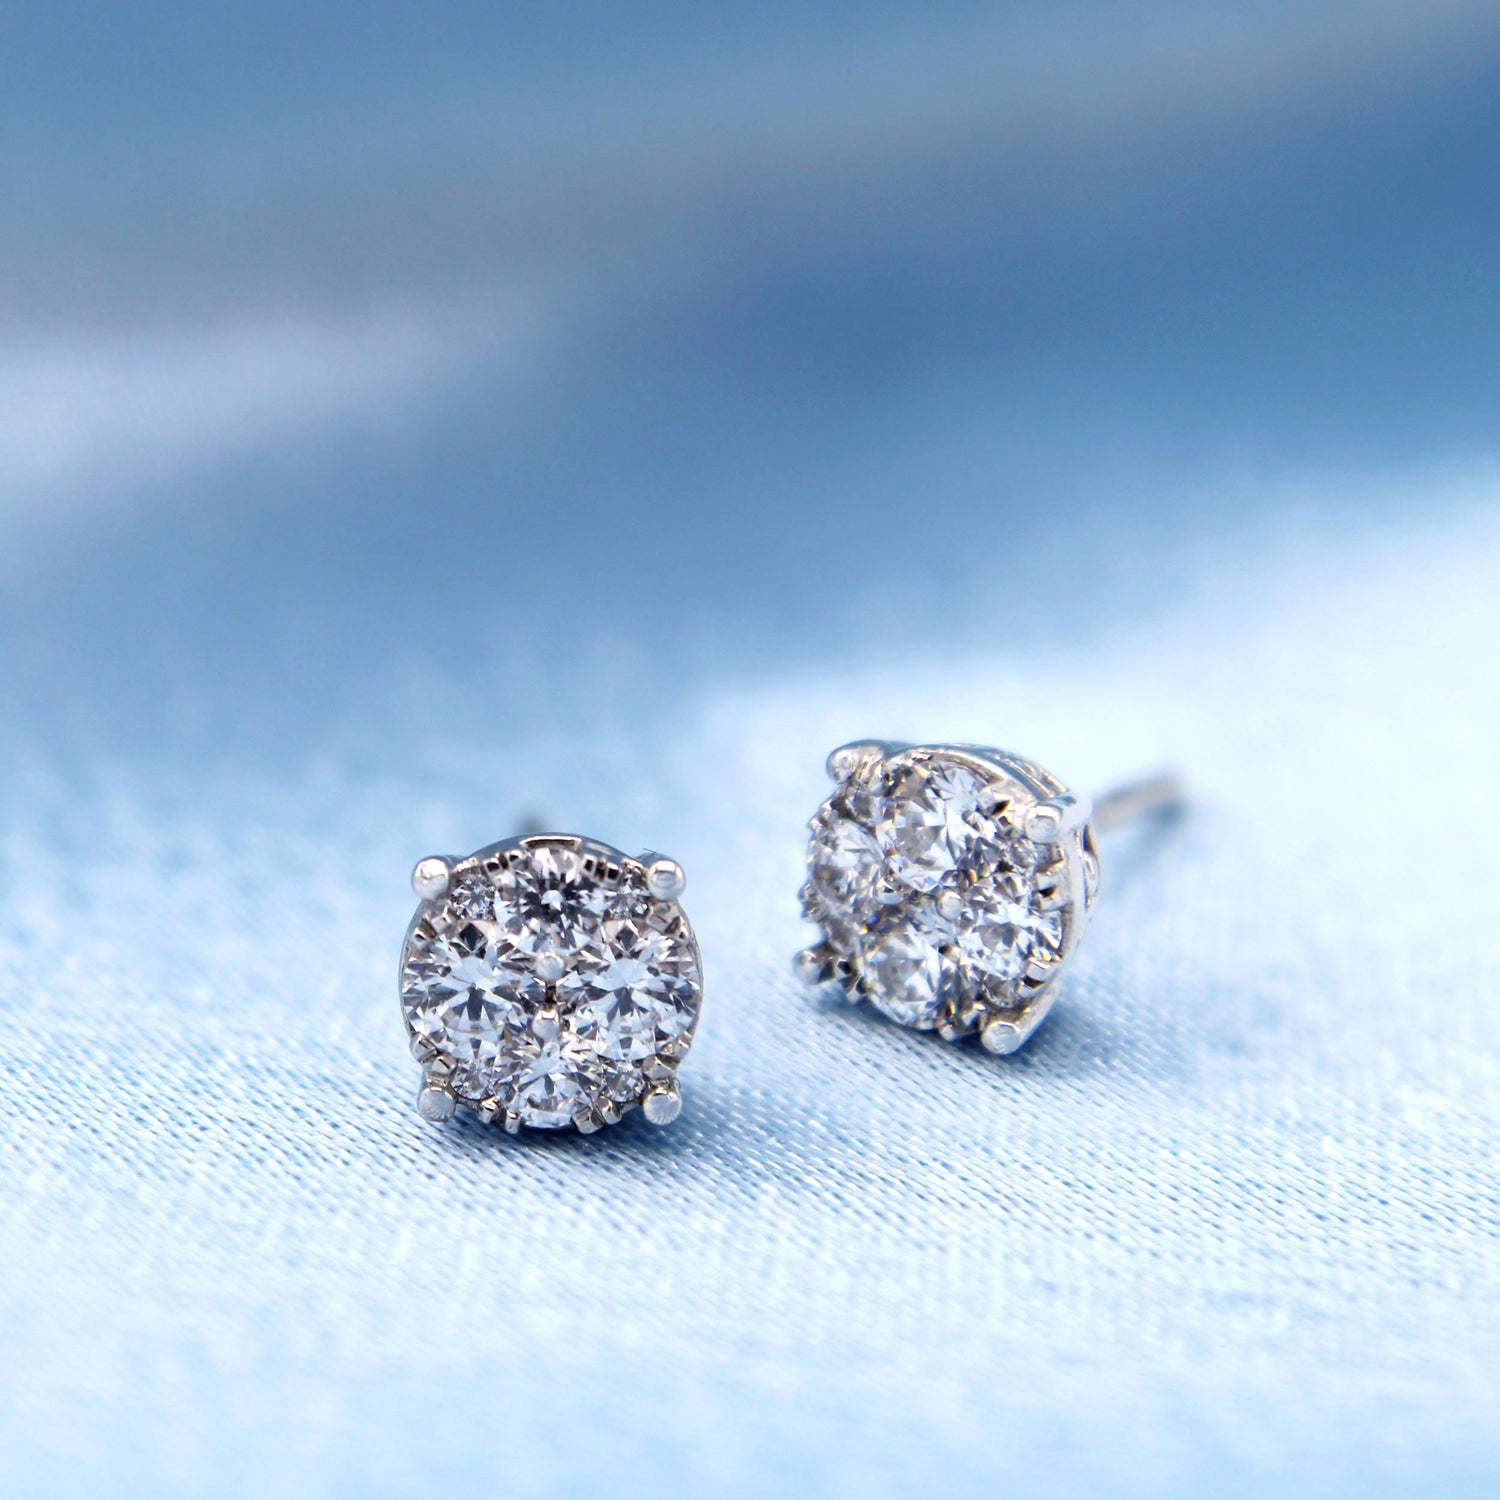 LAB GROWN 1/4 - 1 Cttw Diamond Round Grand Cluster Stud Earrings jewelry